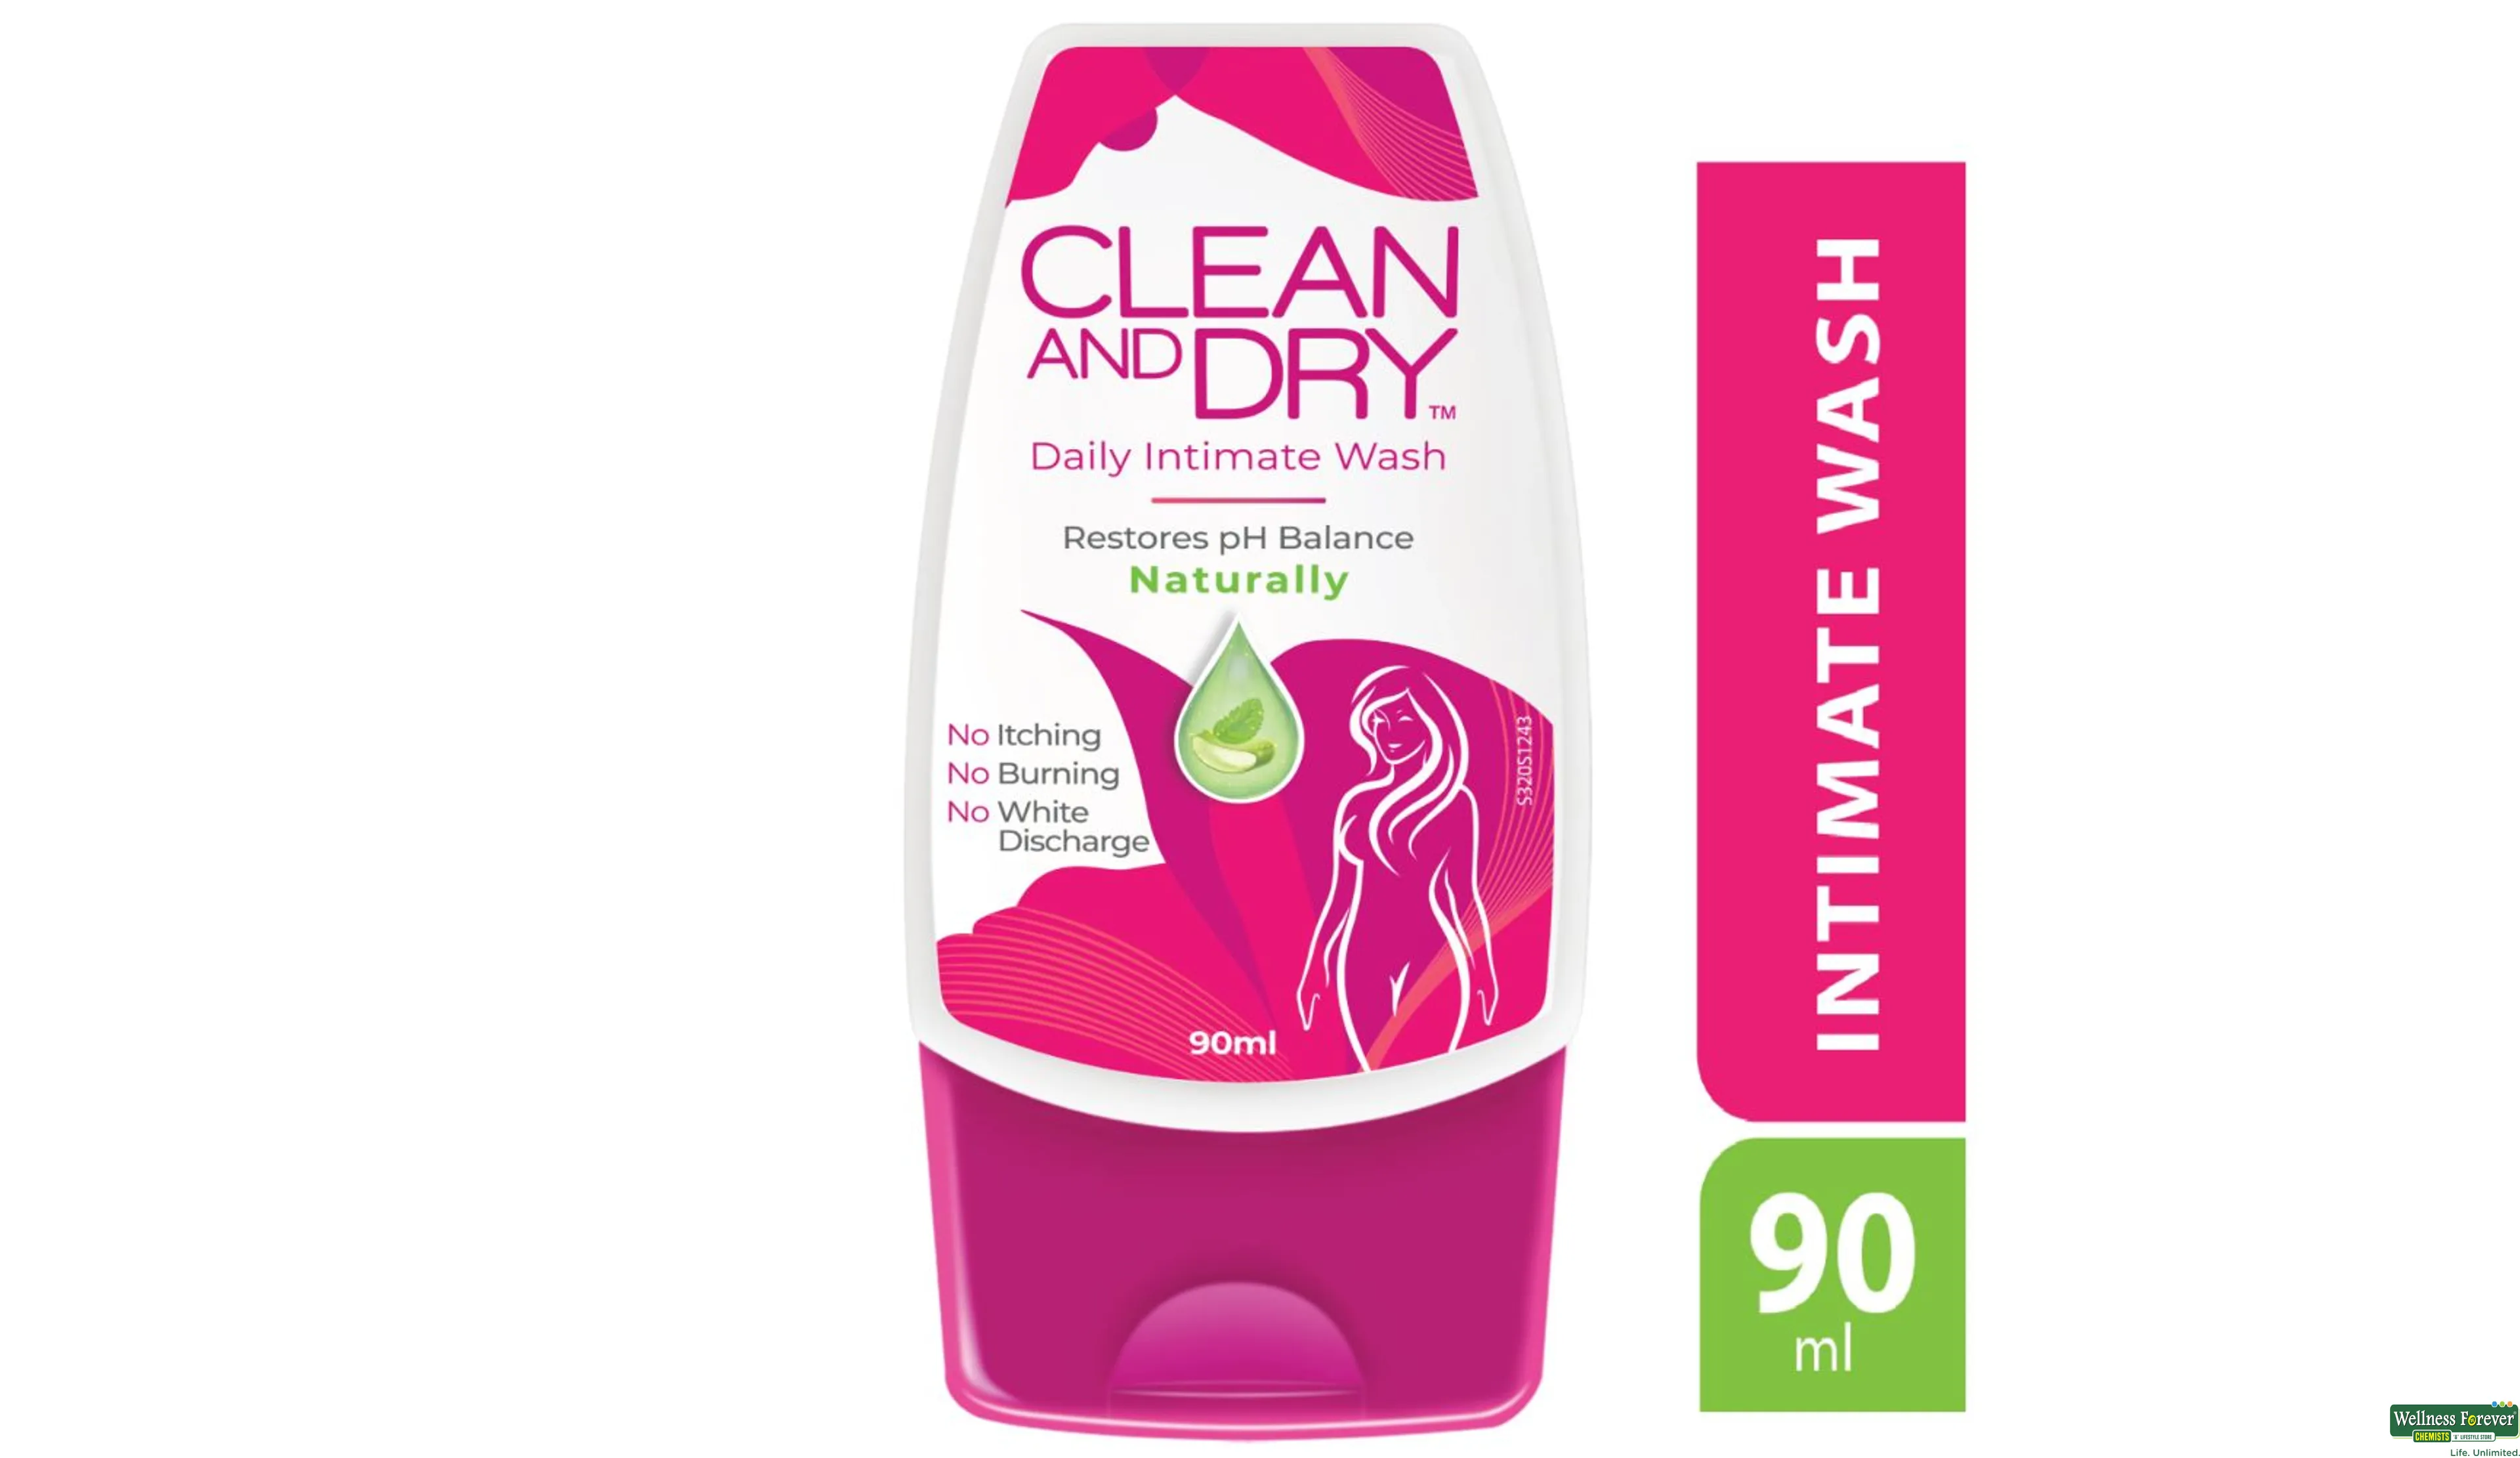 CLEAN AND DRY INTIMATE WASH 90ML- 1, 90ML, 